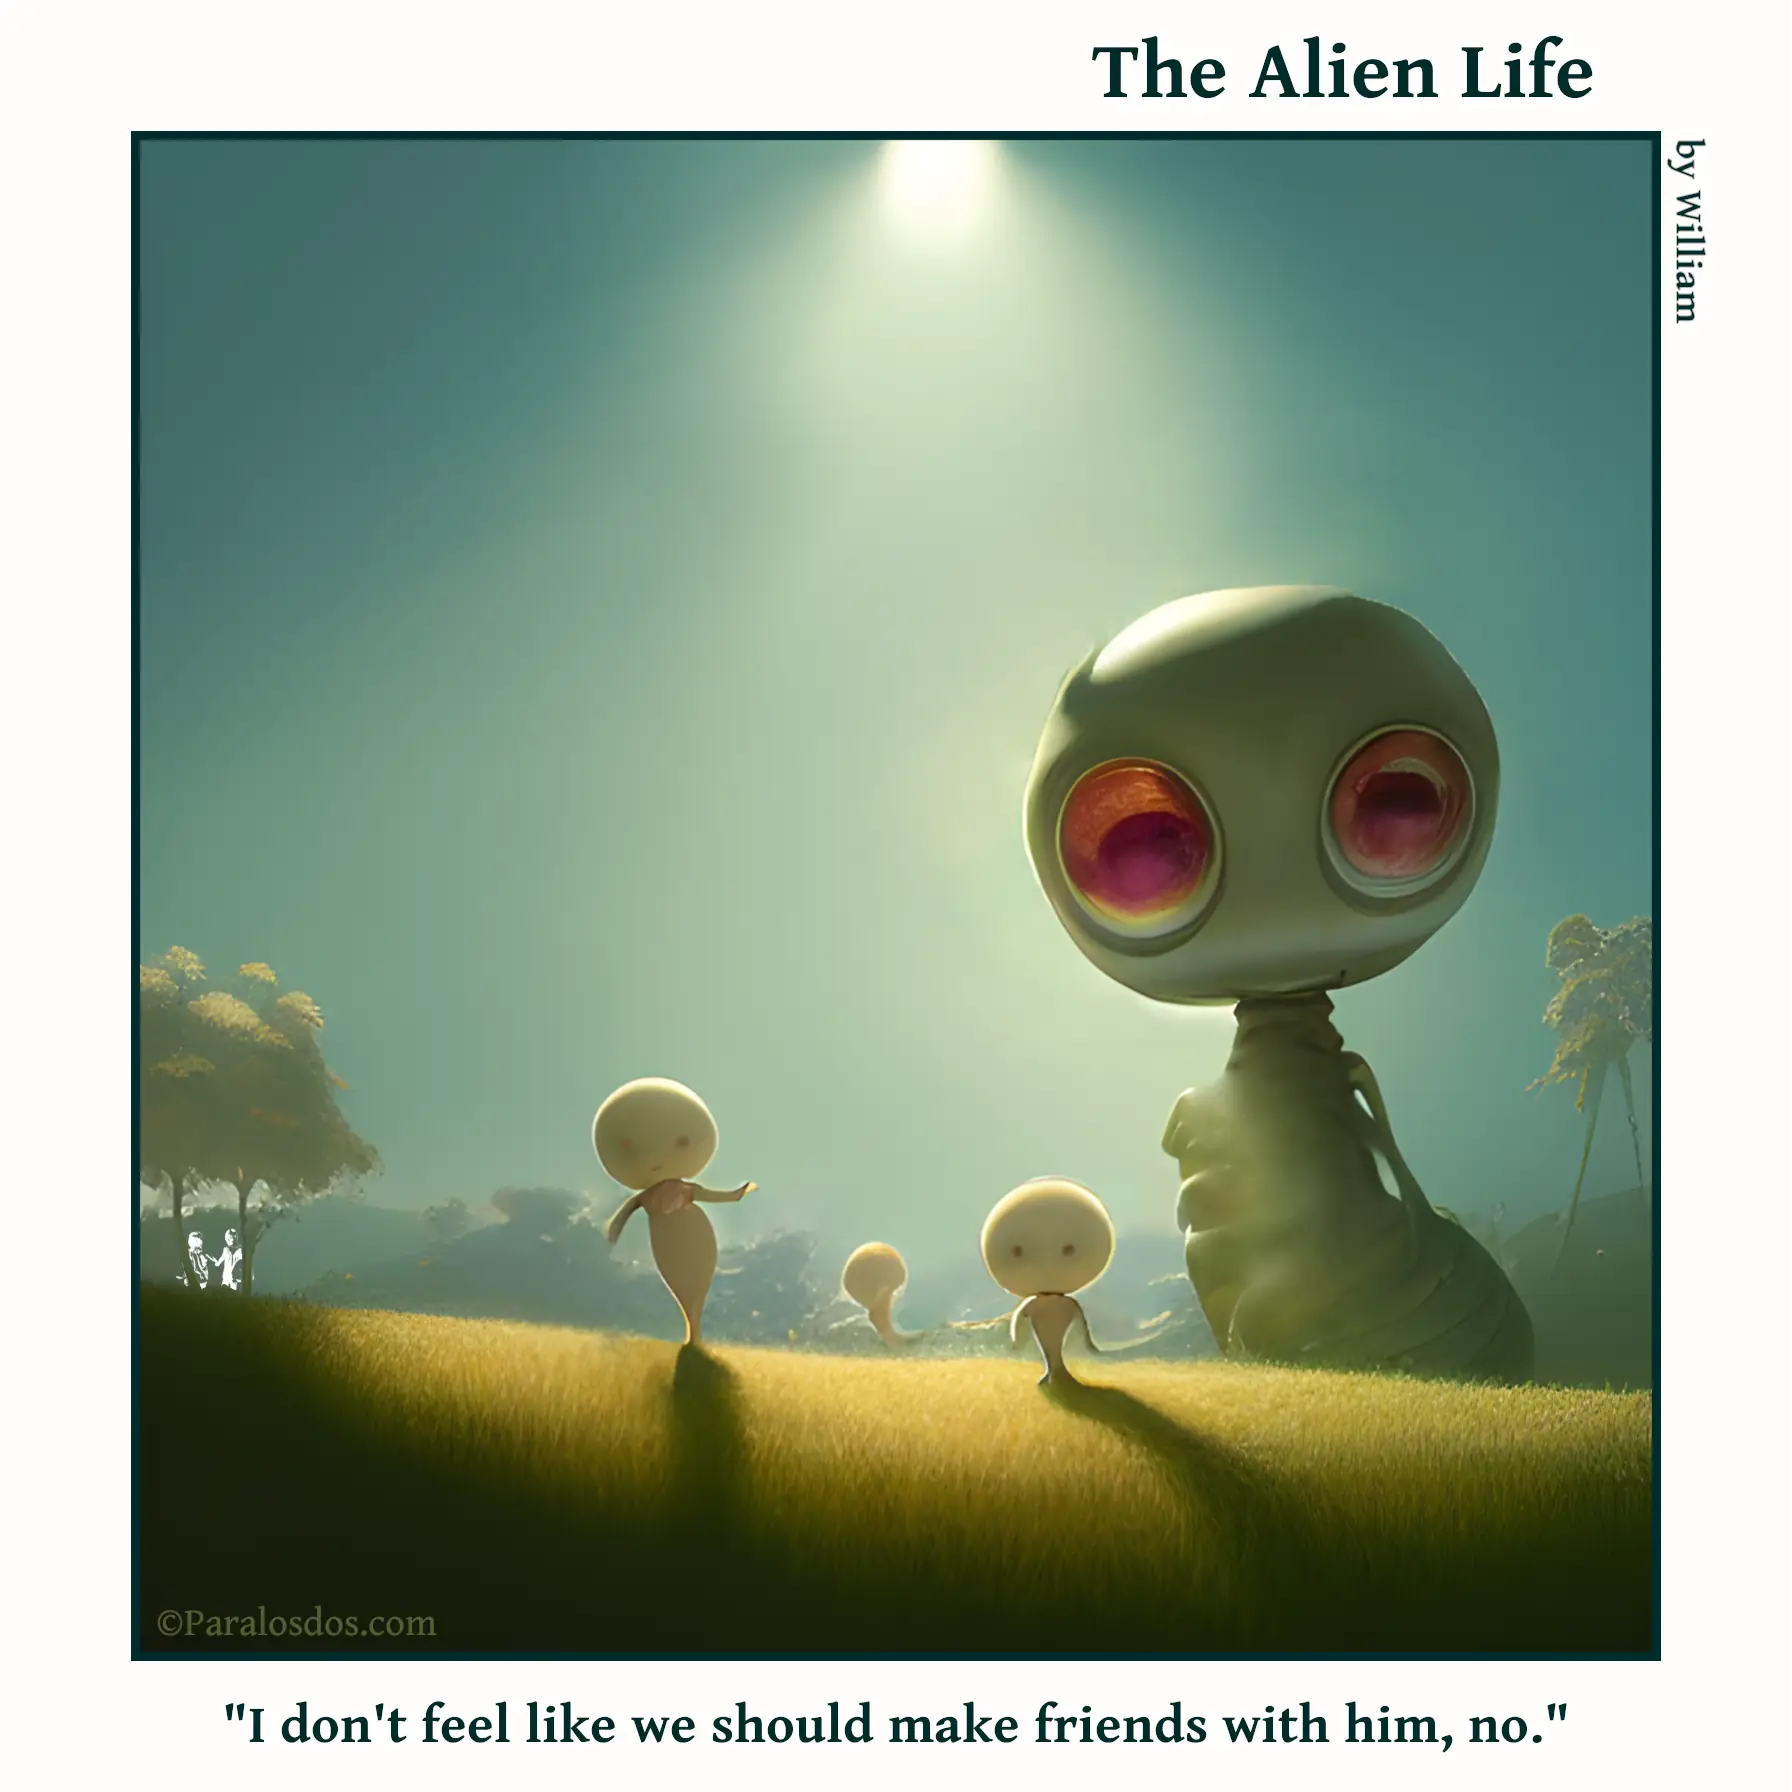 The Alien Life, one panel Comic. Aliens are running through a field being followed by a giant ant-like creature. The caption reads: "I don't feel like we should make friends with him, no."